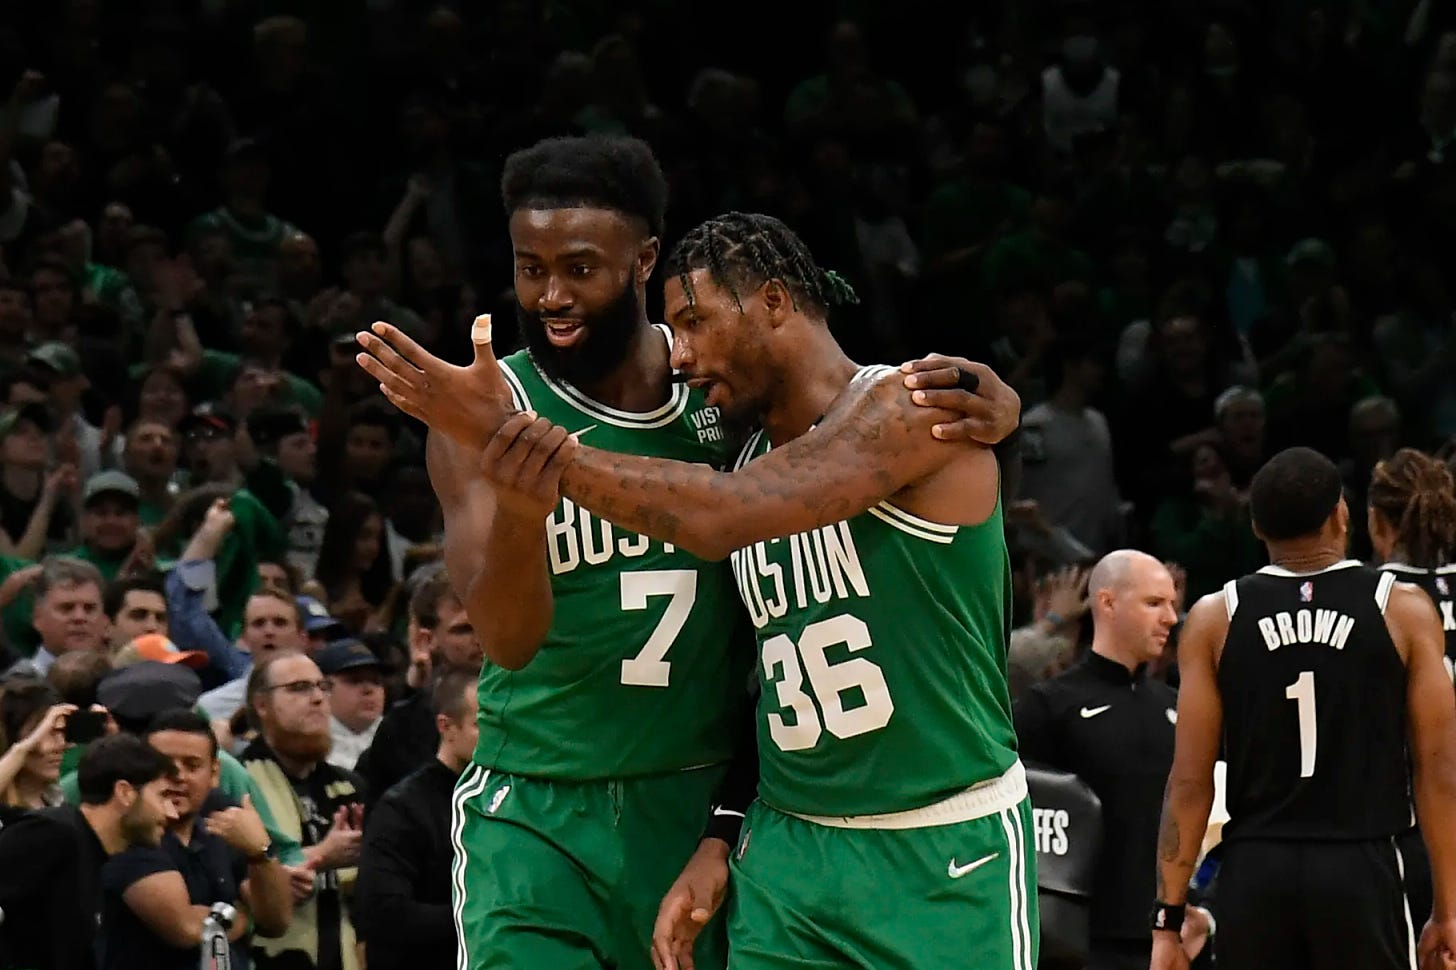 Marcus Smart staring at his left hand while Jaylen Brown also stares at his hand.